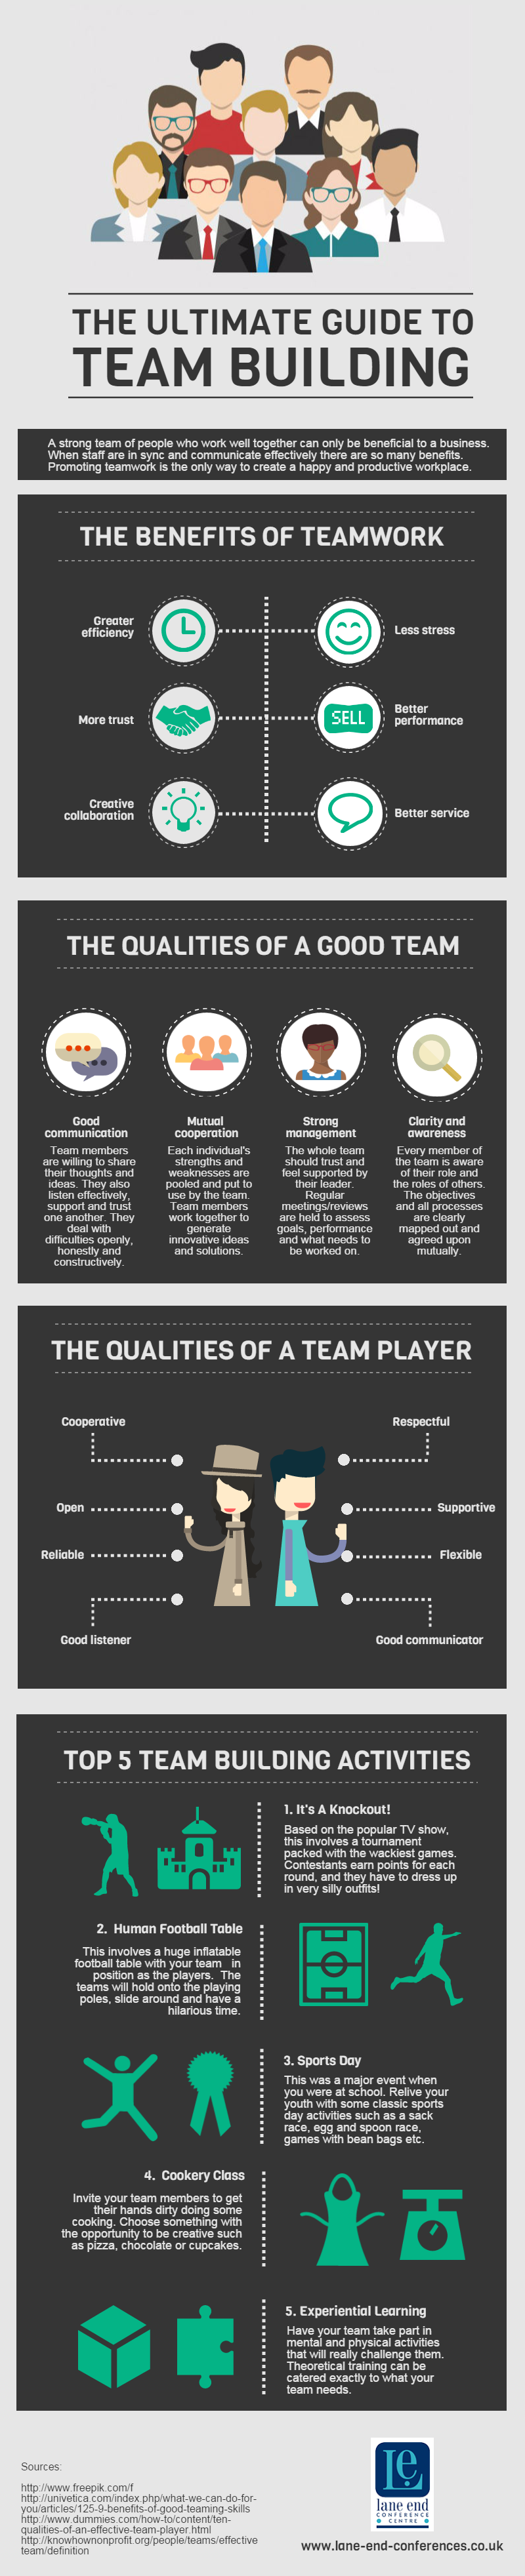 The Ultimate Guide to Team Building